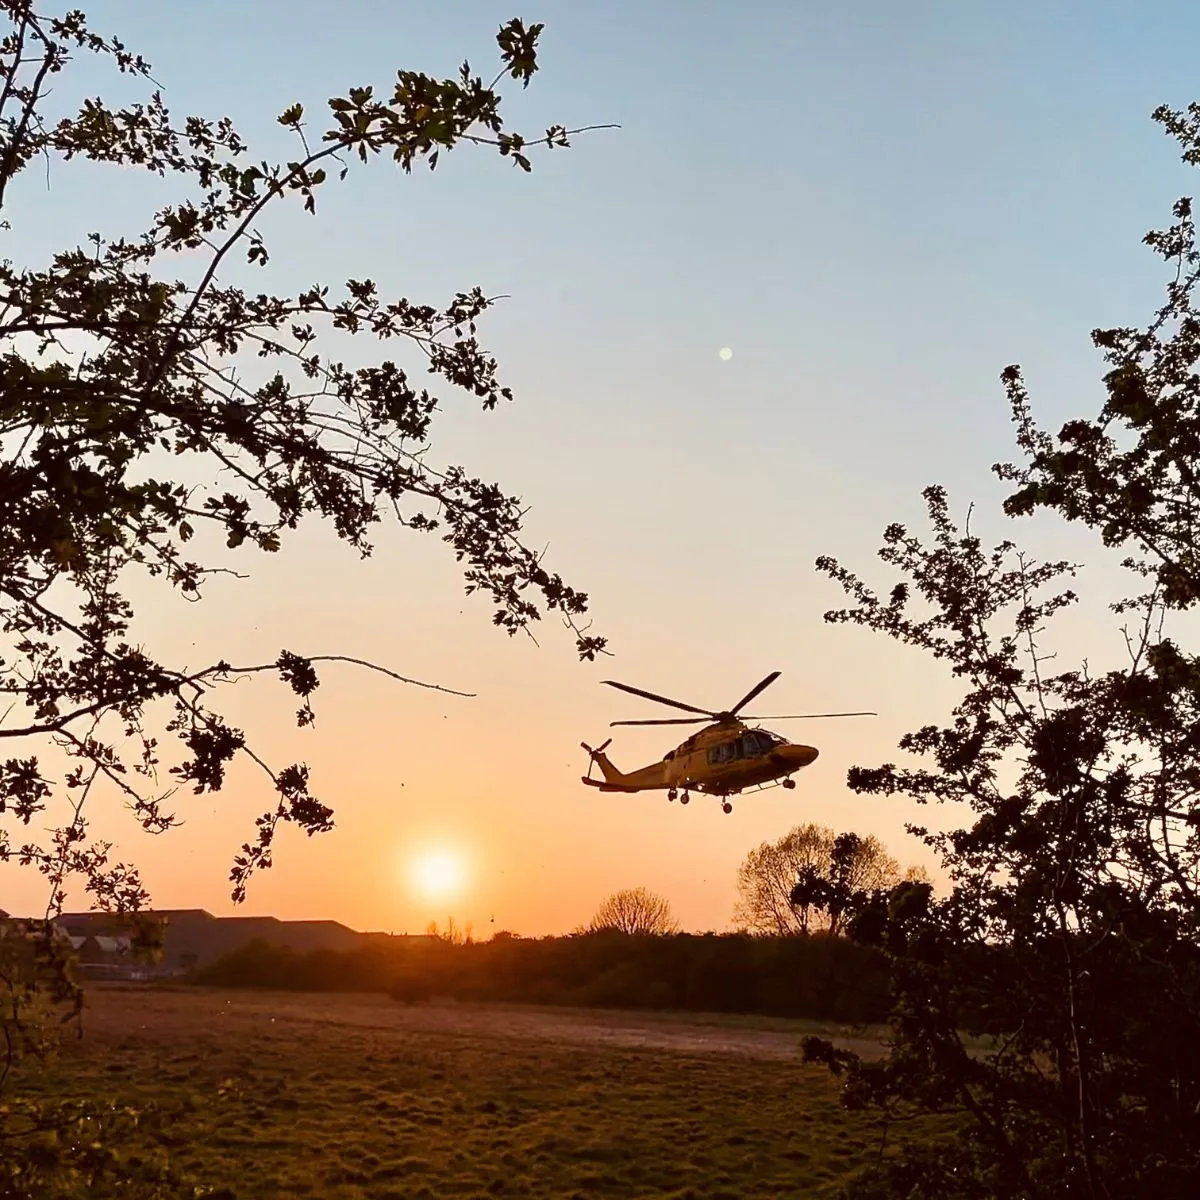 Helicopter taking off at sunset